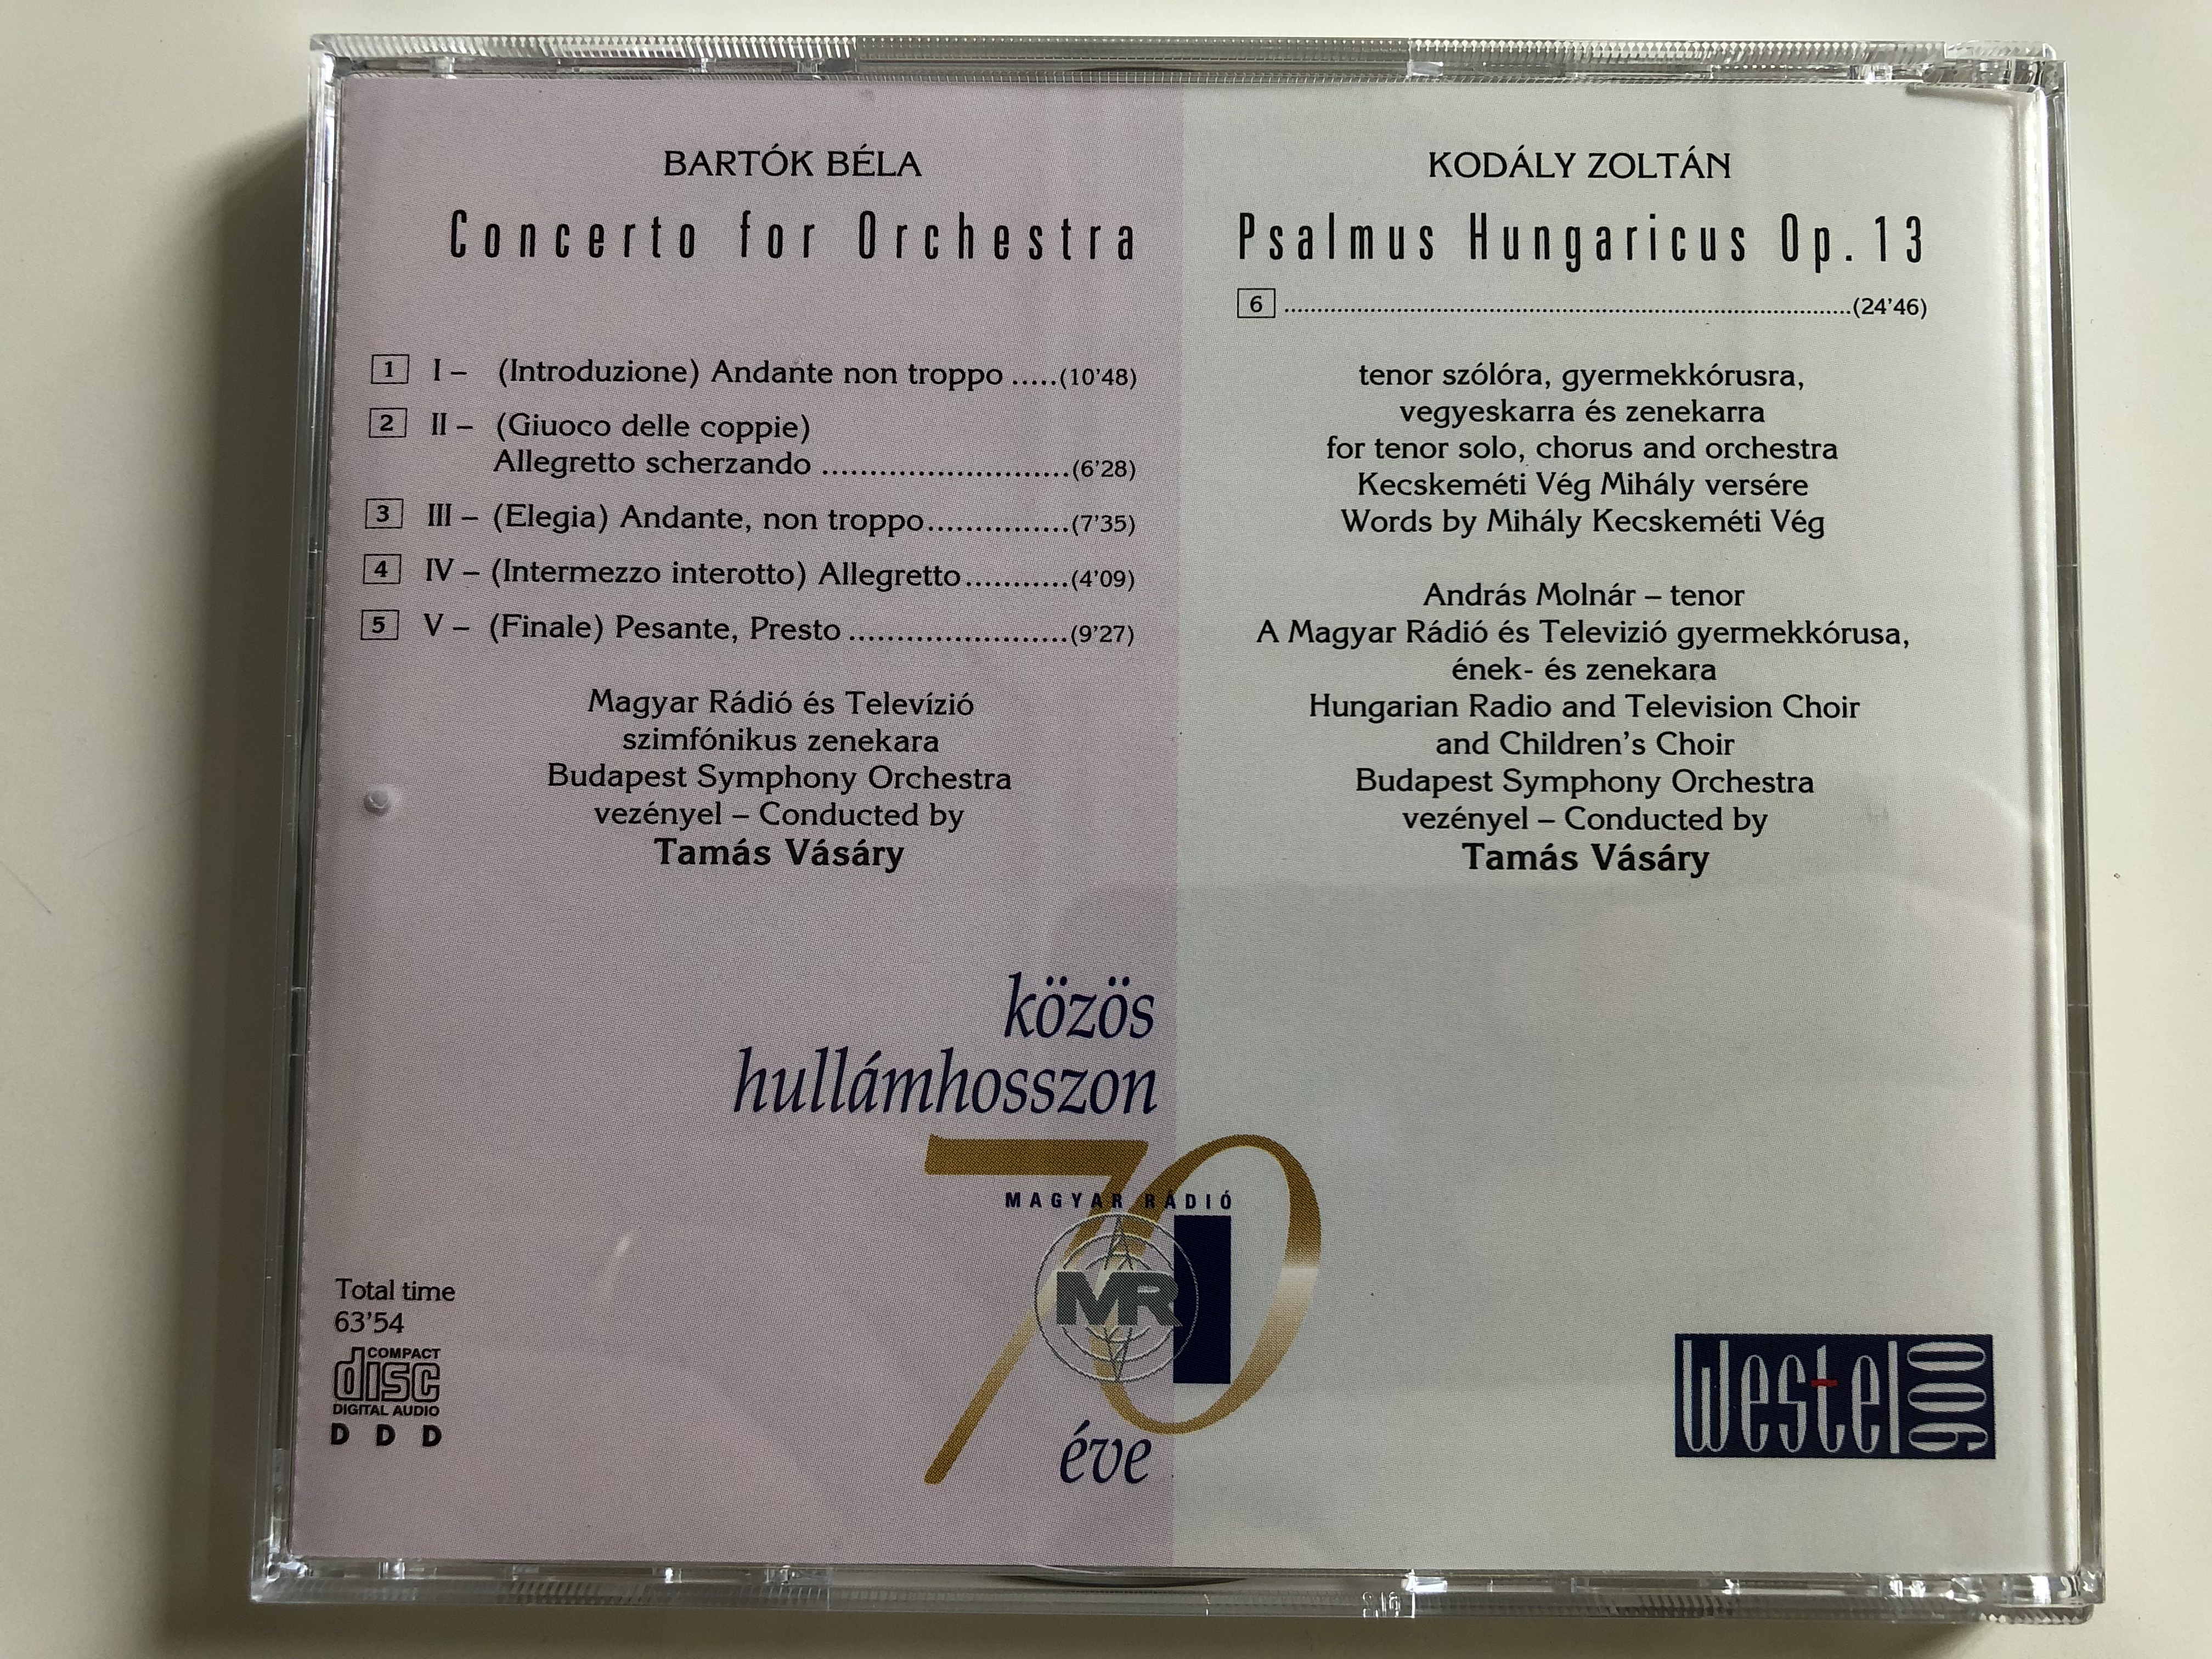 bart-k-b-la-concerto-for-orchestra-kod-ly-zolt-n-psalmus-hungaricus-op.-13-hungarian-radio-and-tv-symphonic-orchestra-cond.-tam-s-v-s-ry-audio-cd-12-.jpg